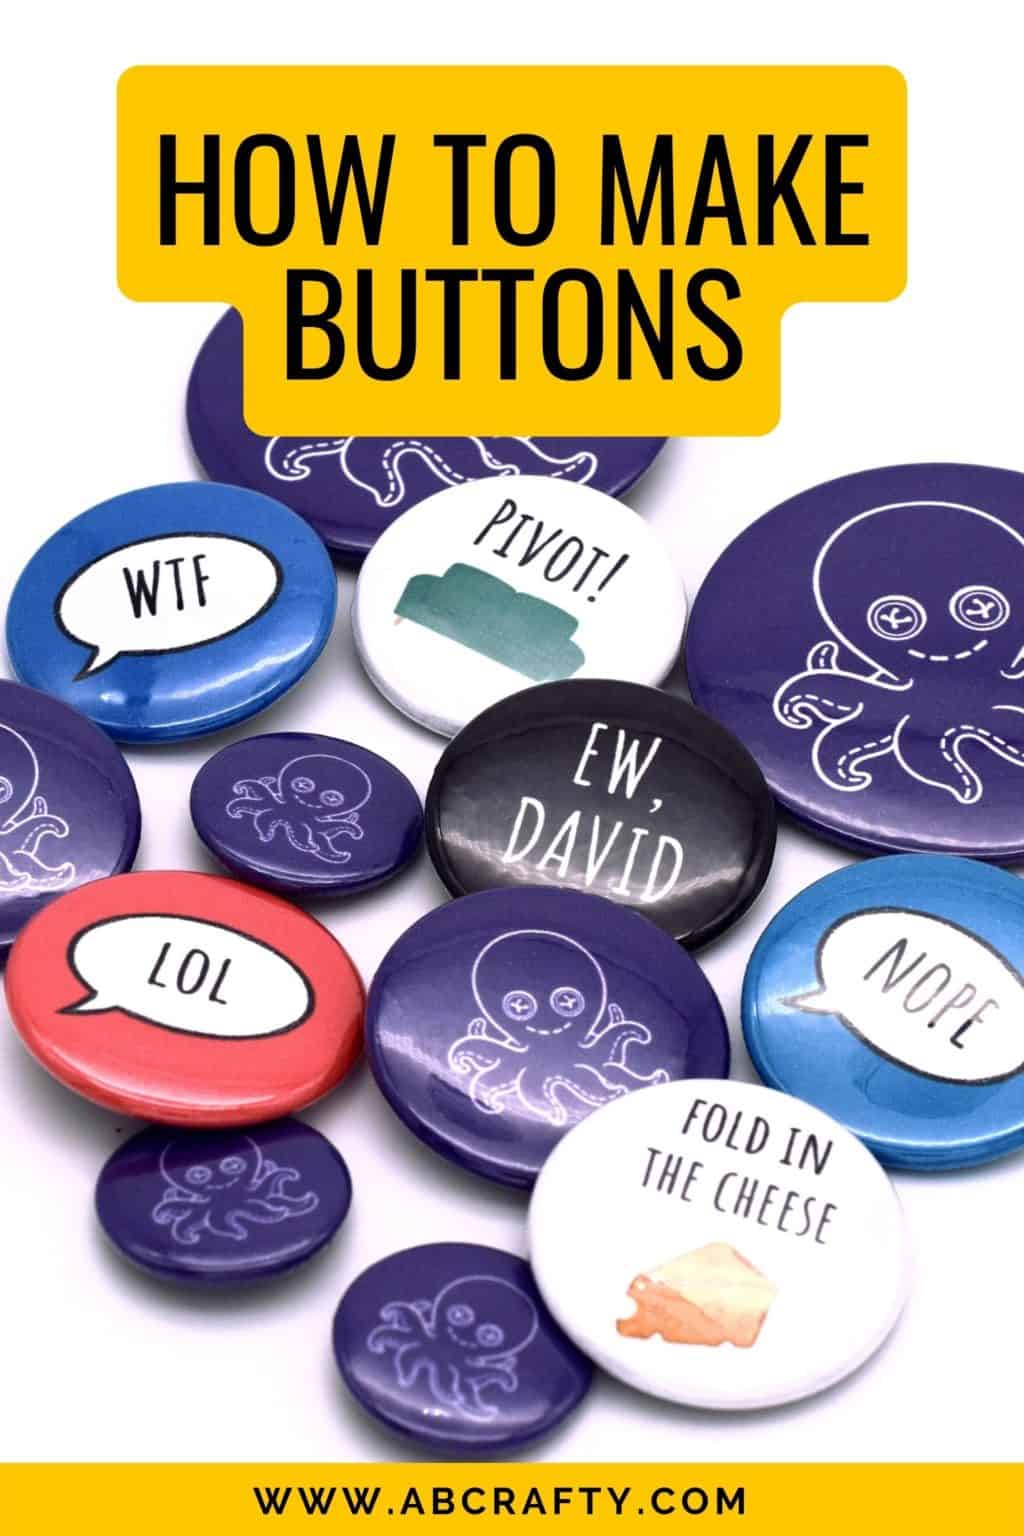 3 Ways to Make a Button Pin - wikiHow